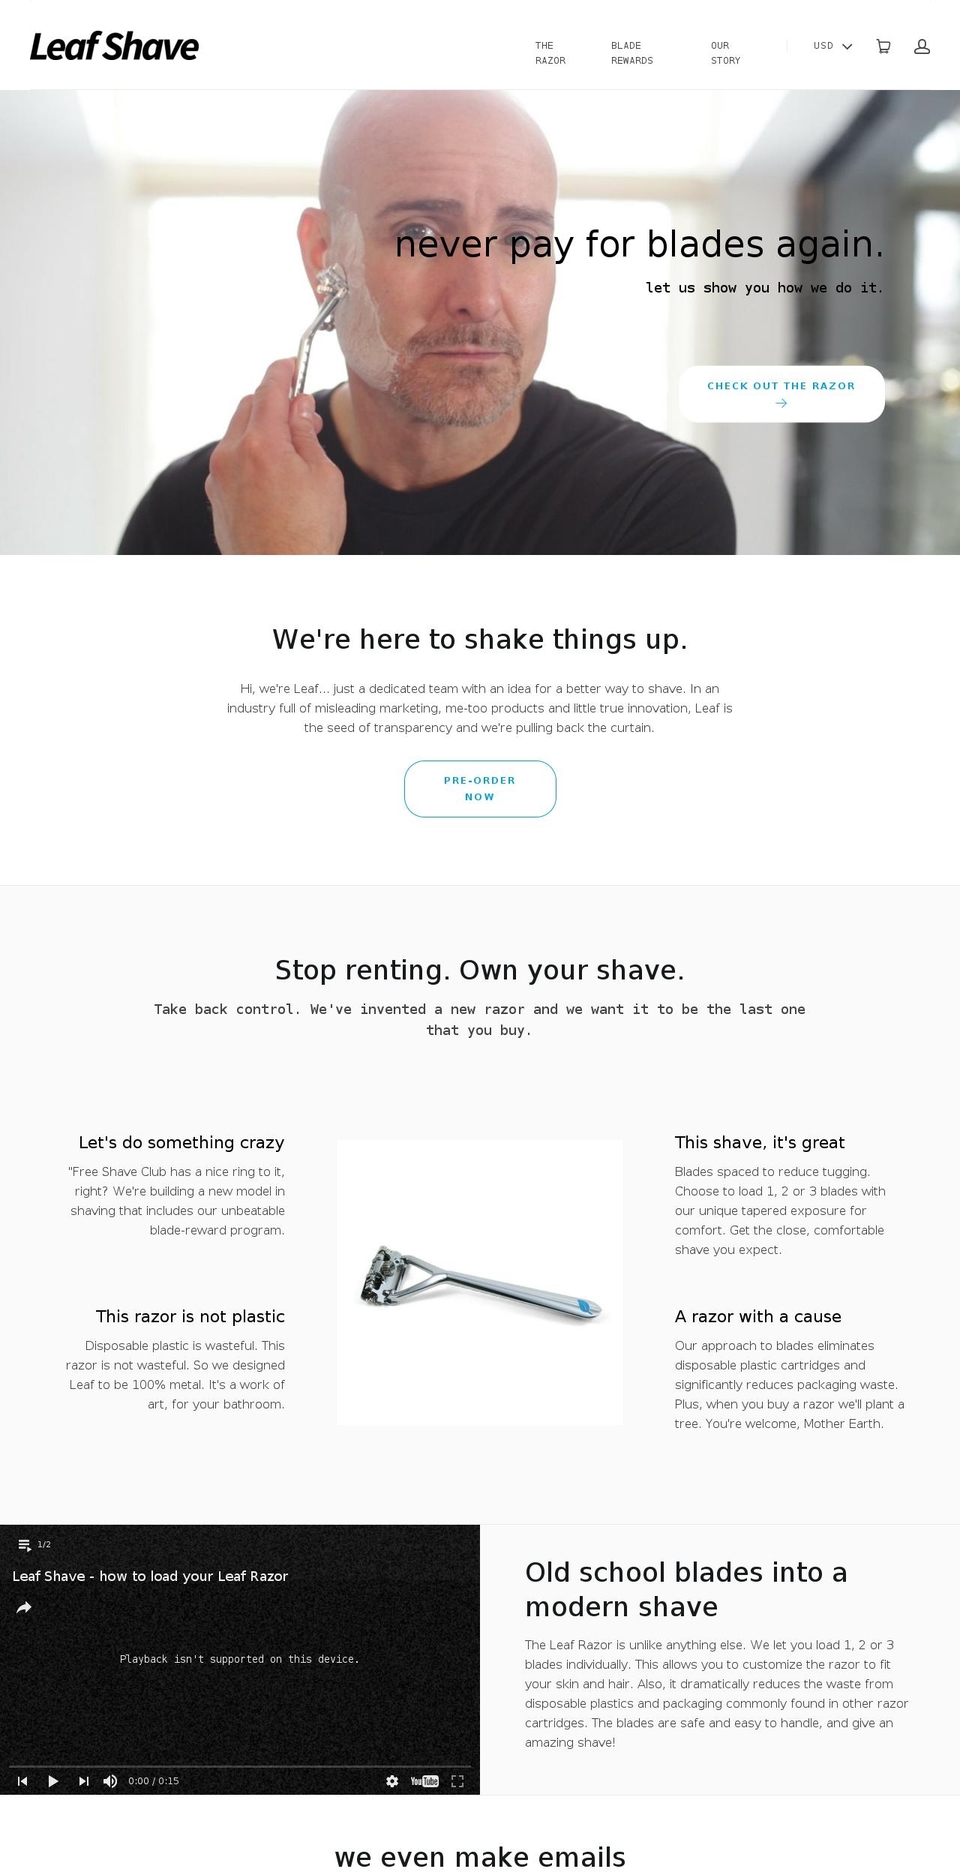 Impact Shopify theme site example leafshave.com